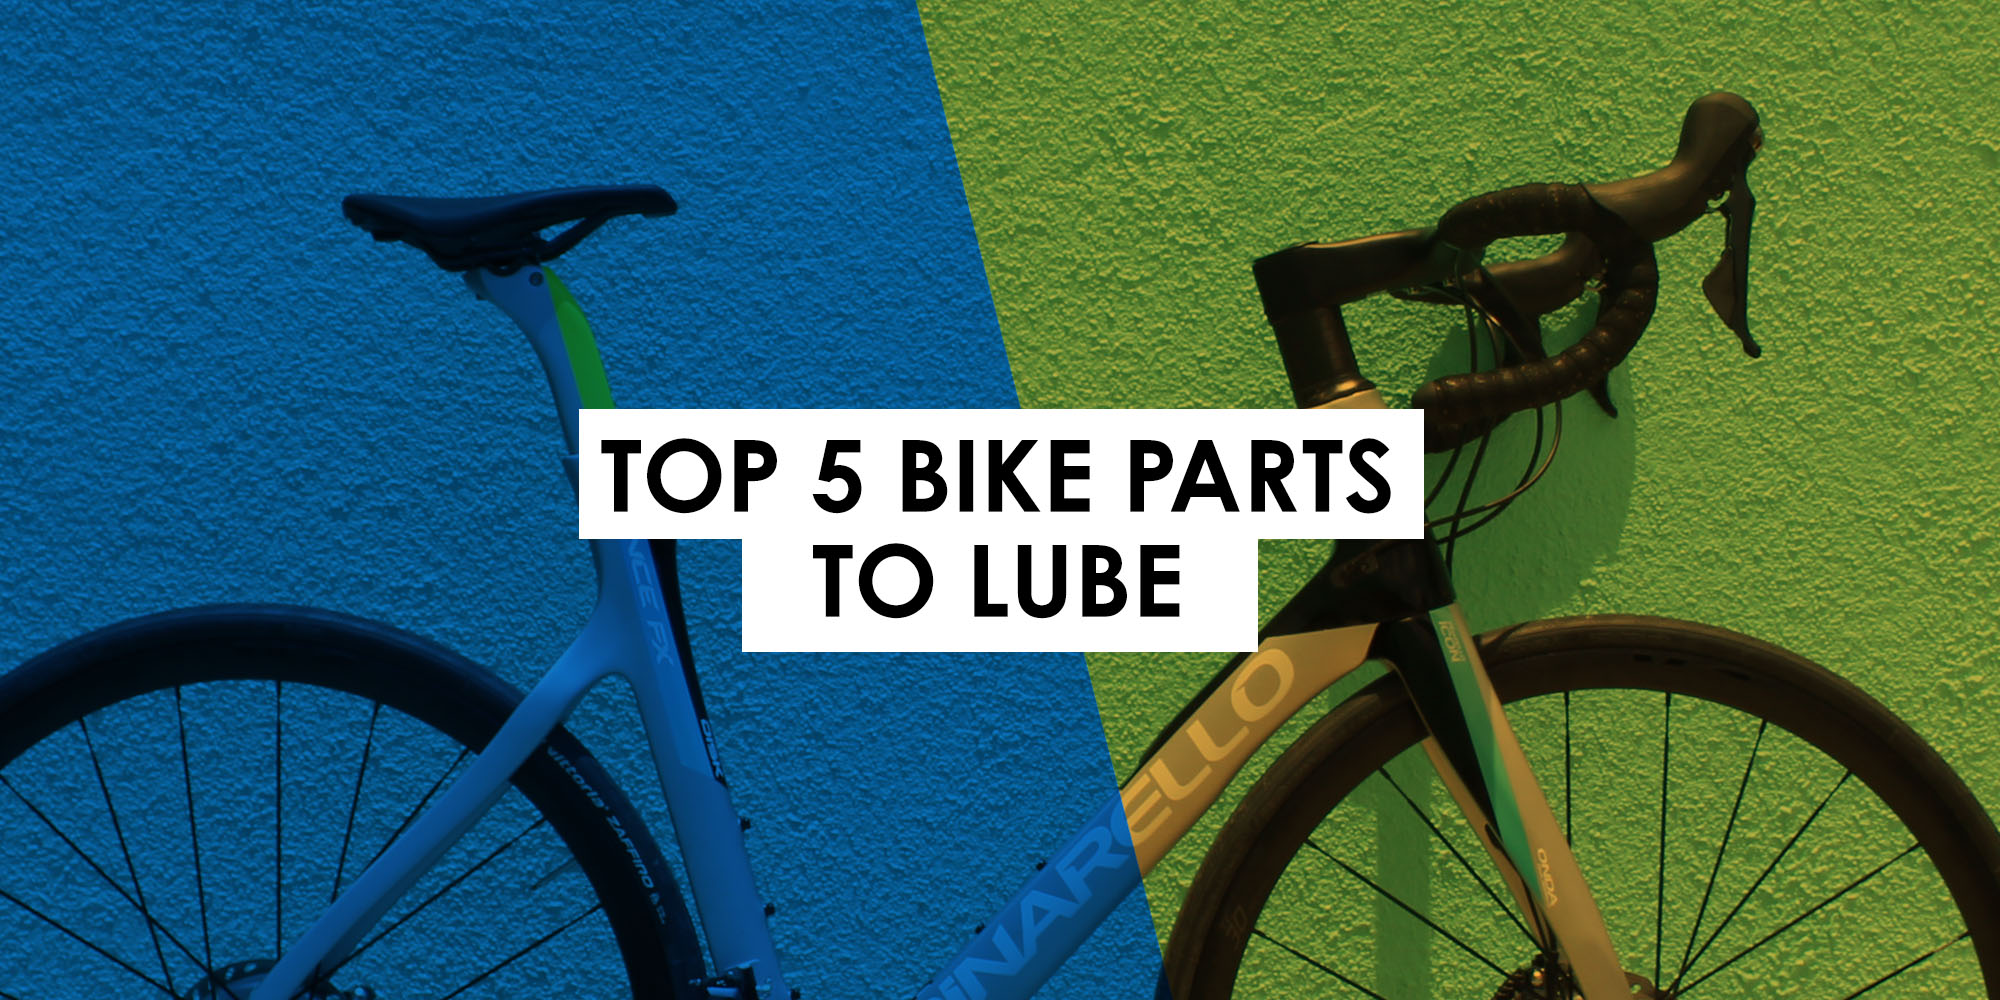 Top 5 Bike Parts to Lube